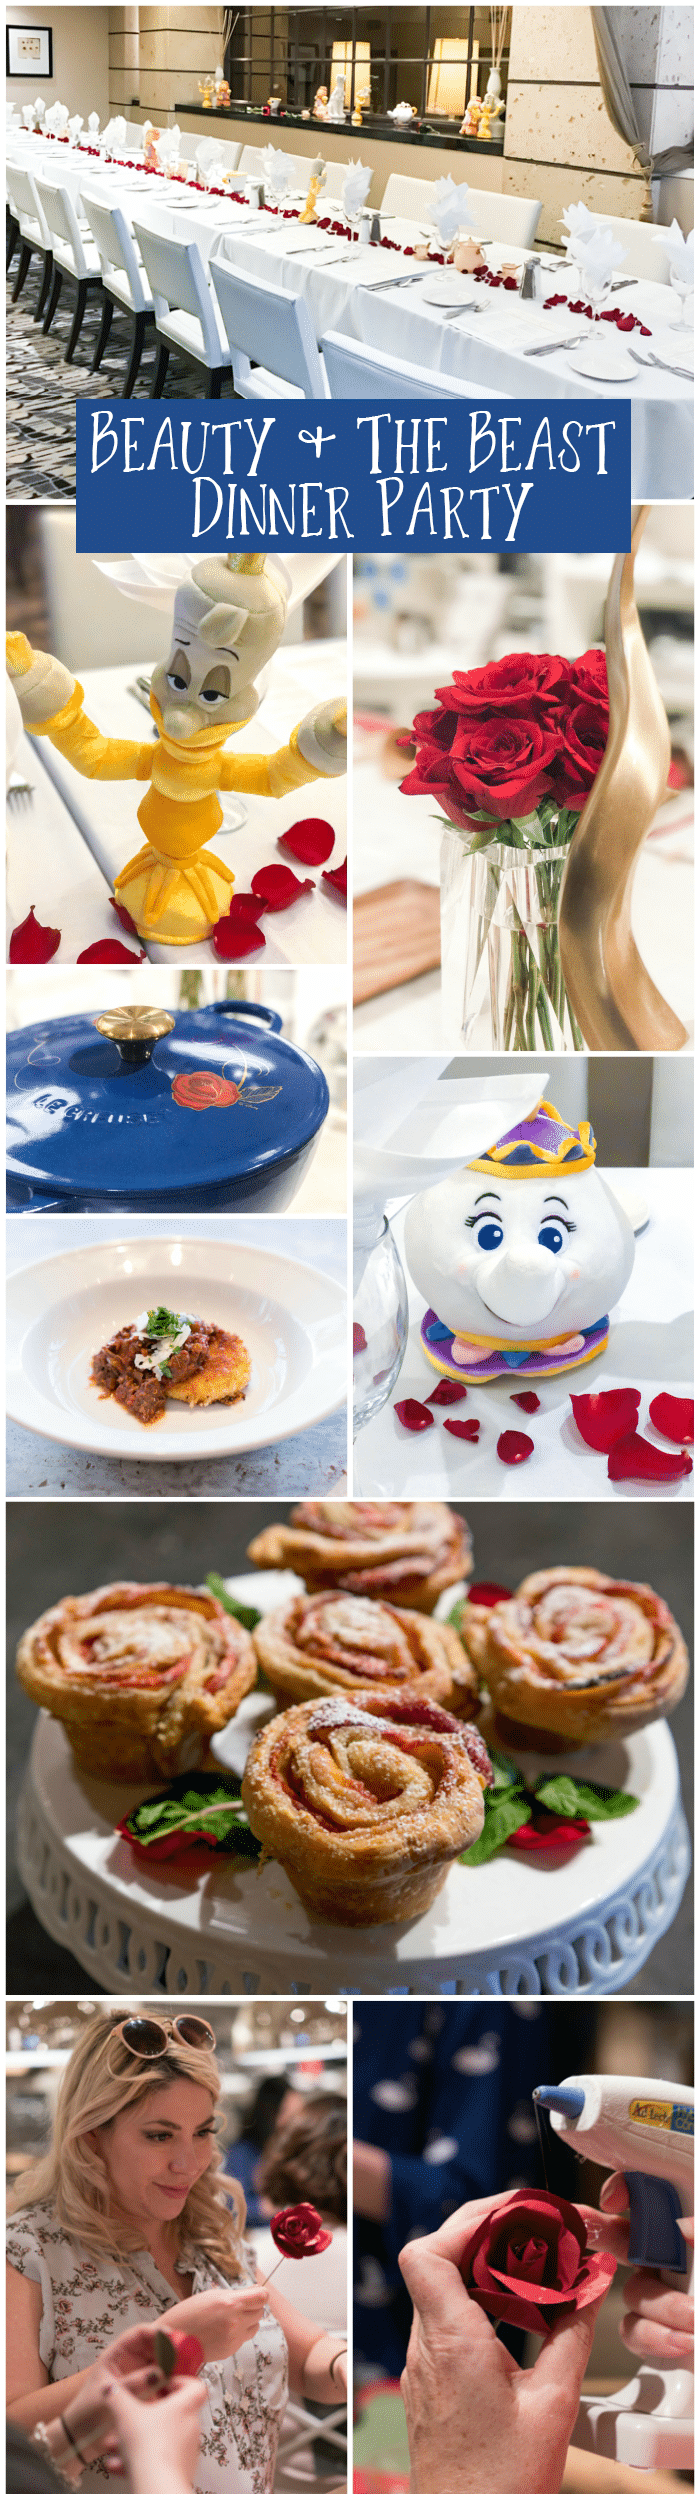 Beauty and the Beast Dinner Party with meal planning for appetizers, drinks, main course with tablescape table setting and decor from Williams Sonoma